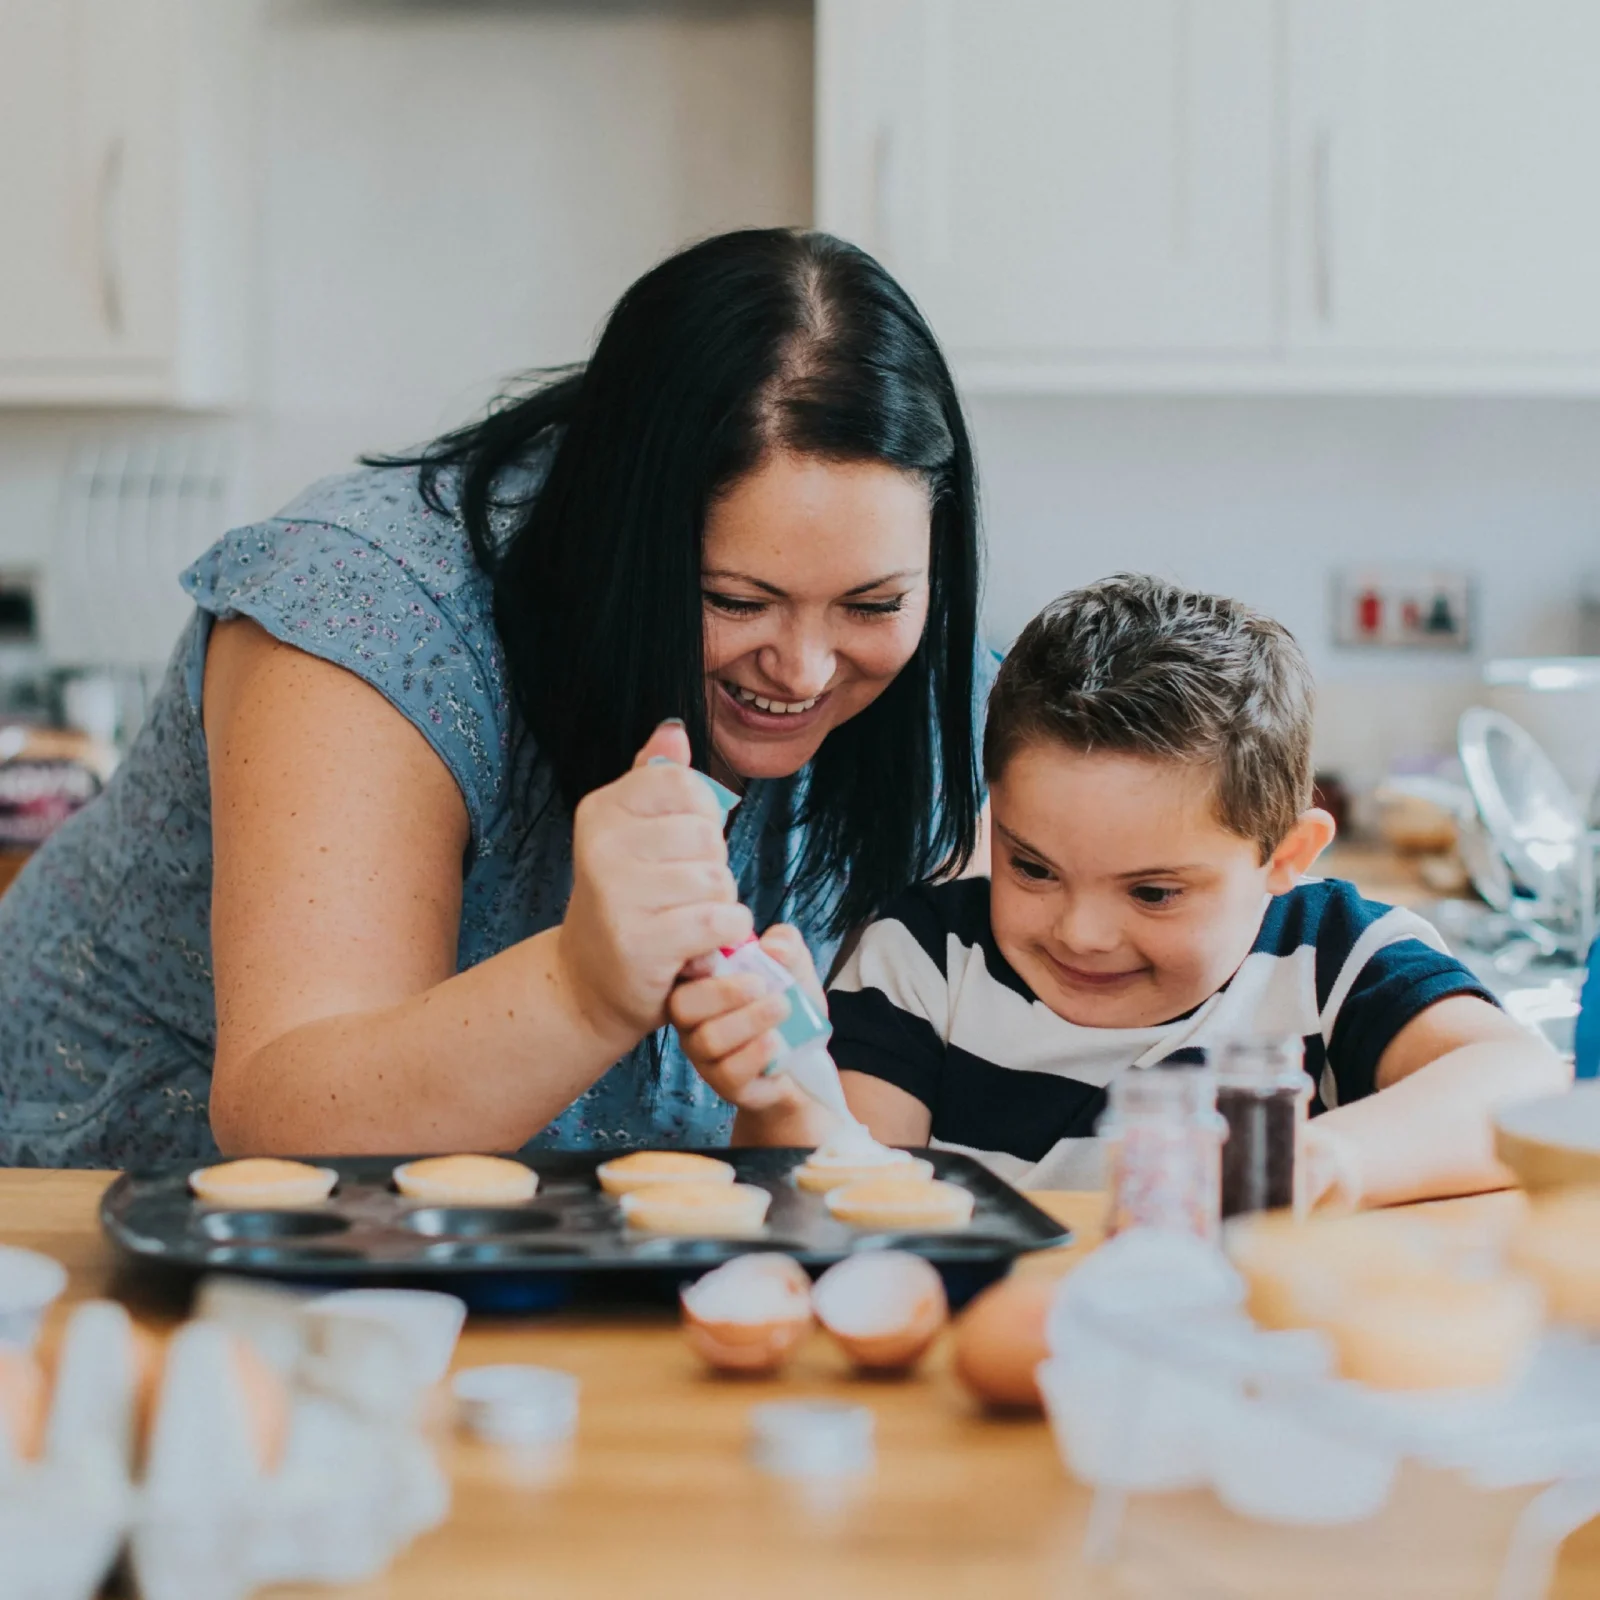 A woman and a young boy happily baking together in a kitchen, with the boy using a whisk on a bowl of batter as they both smile joyfully, evoking the feel of website design that is